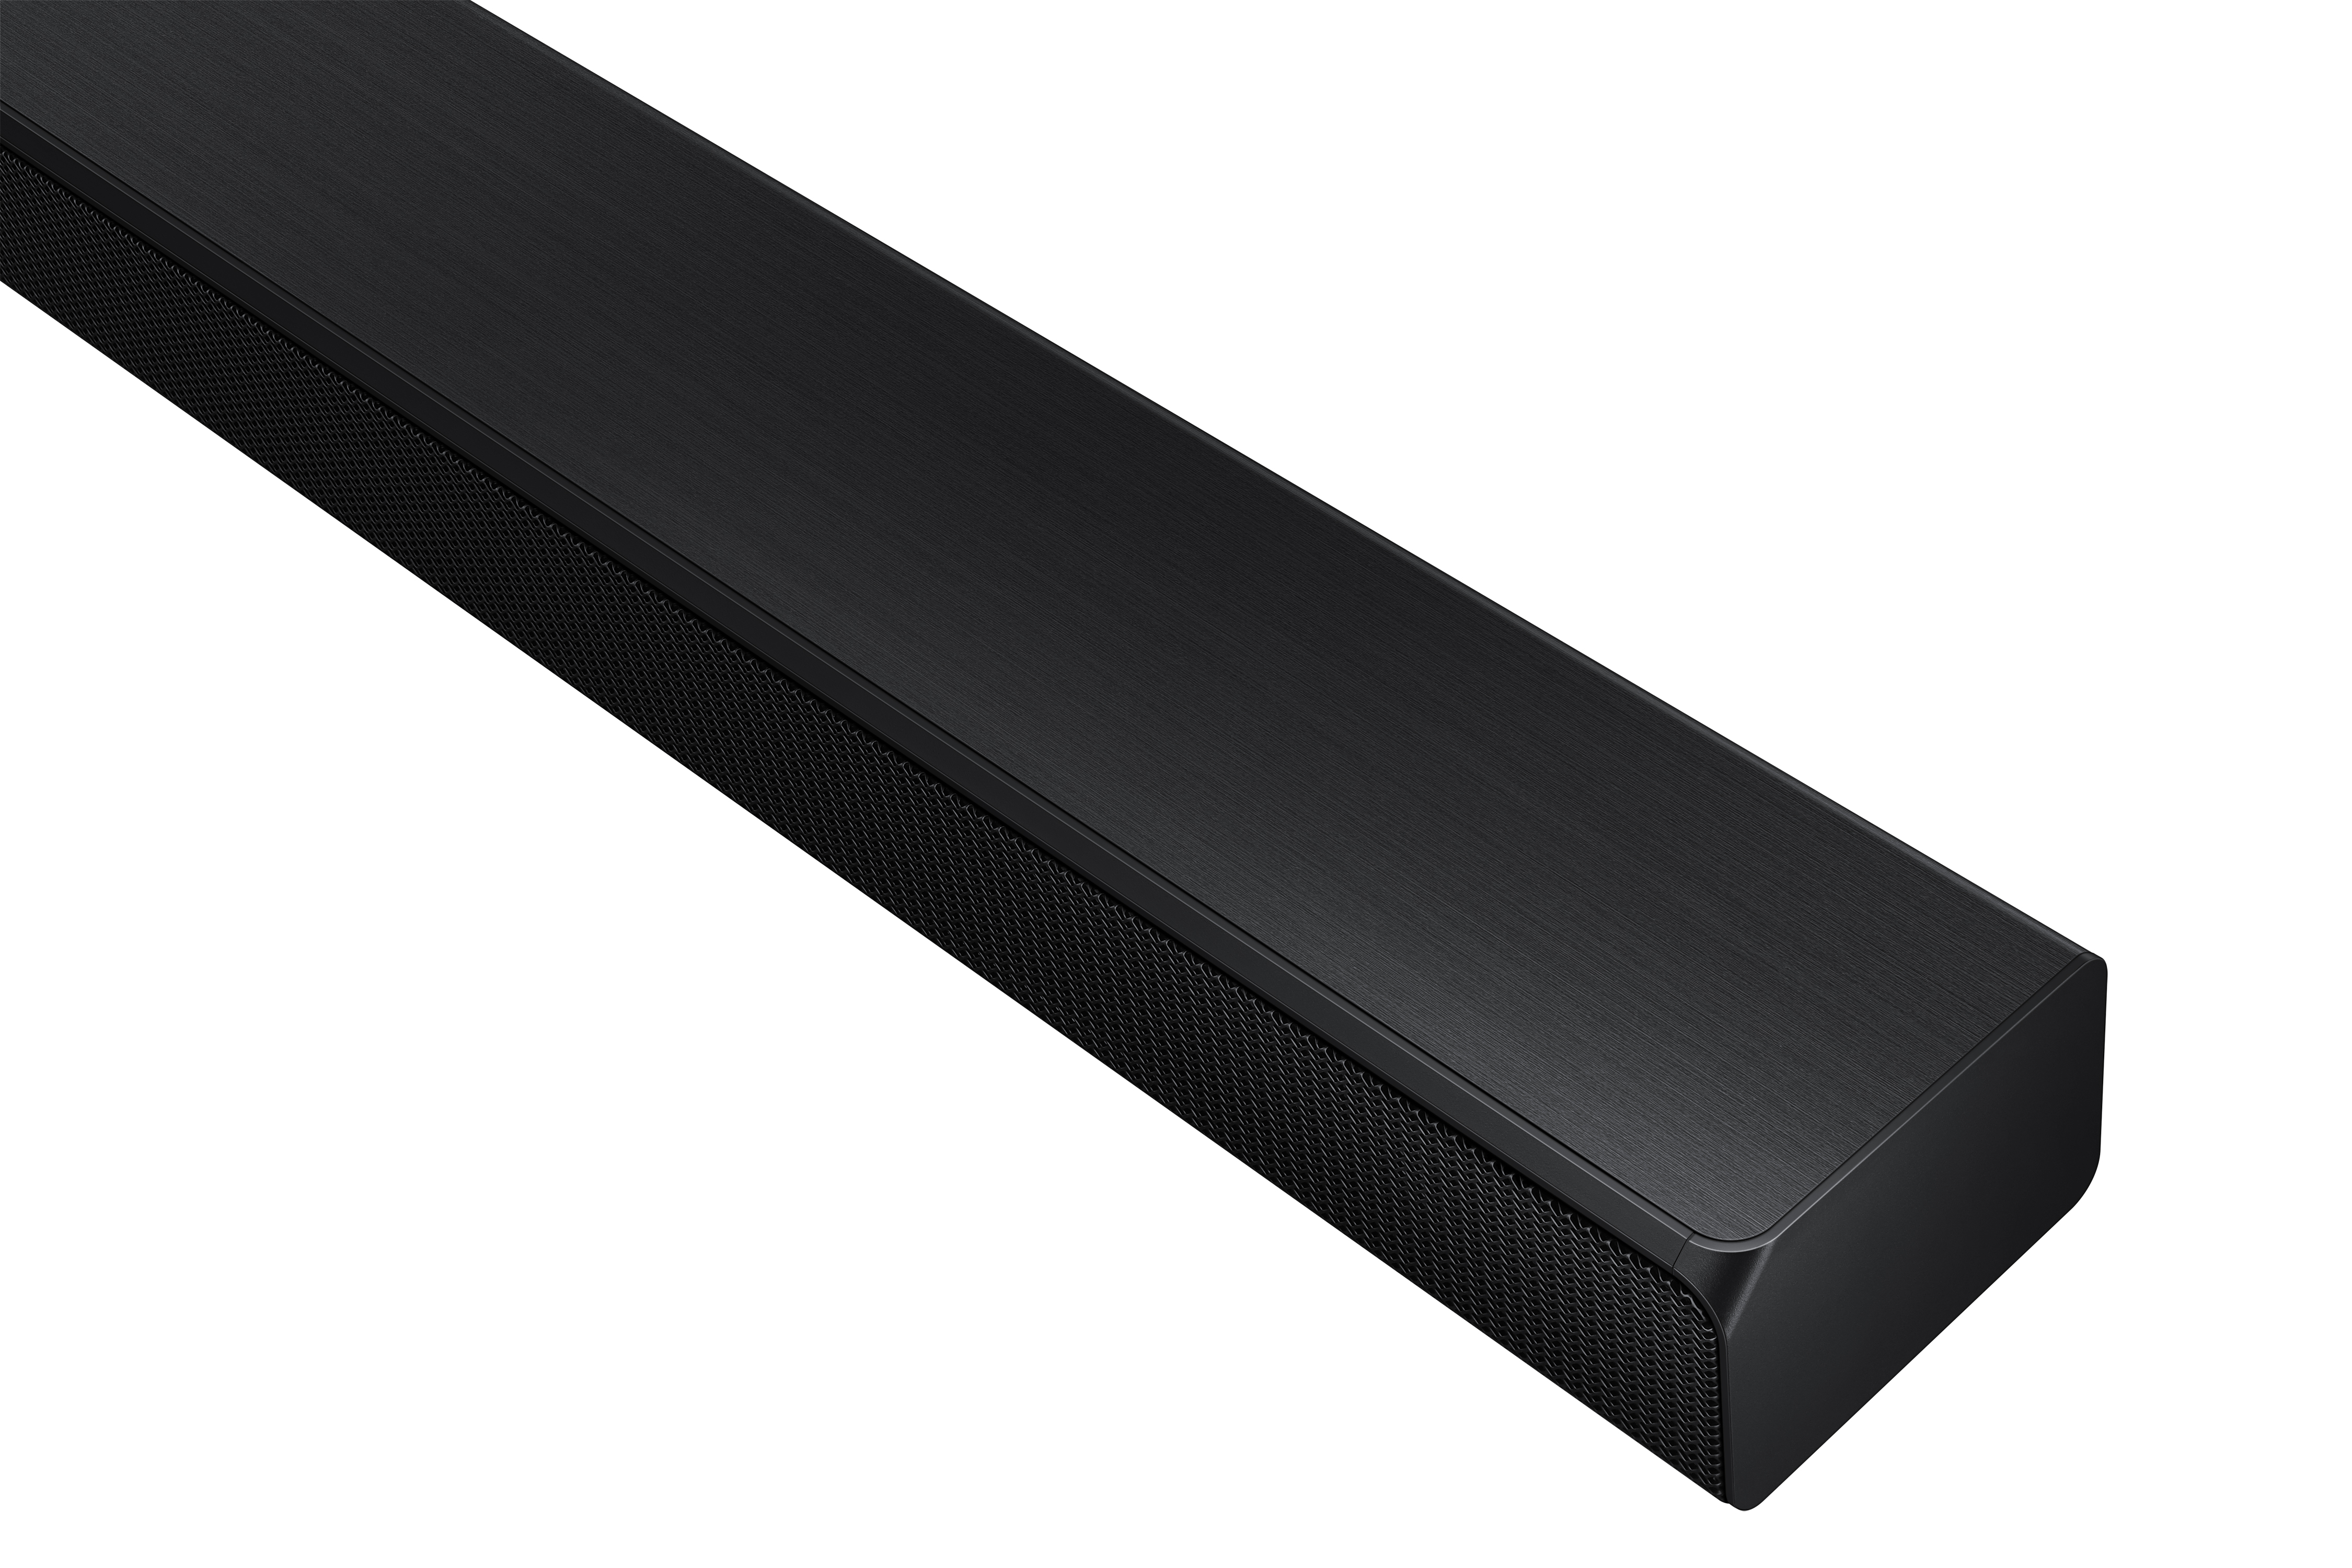 SAMSUNG HW-A50M 2.1 Channel Soundbar with Wireless Subwoofer and Dolby Audio - image 4 of 13